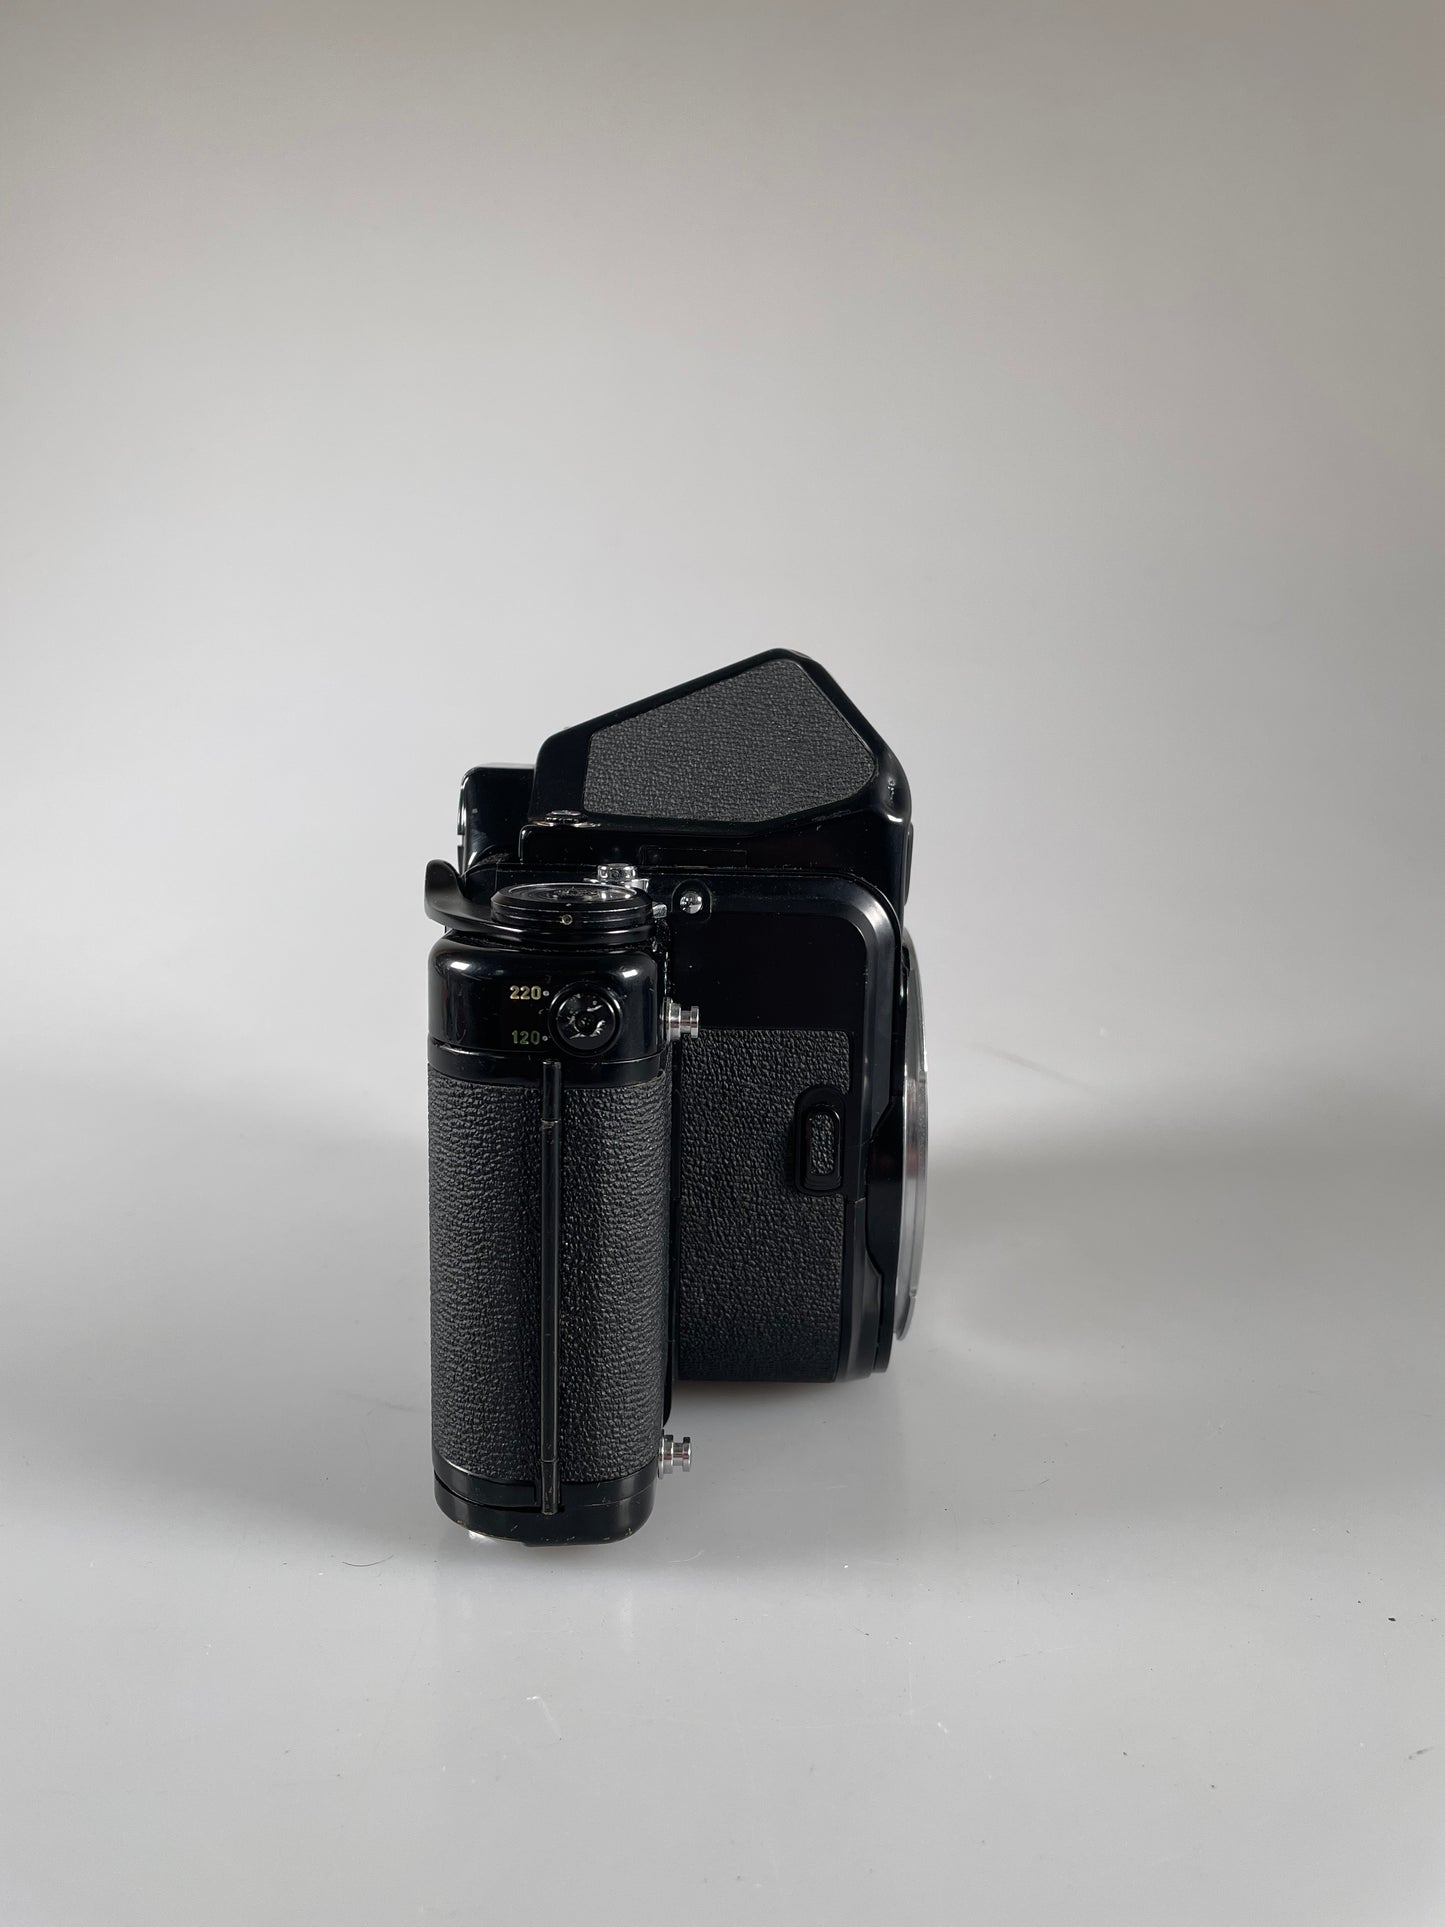 Pentax 67 6x7 Mirror Up MLU Body with metered prism